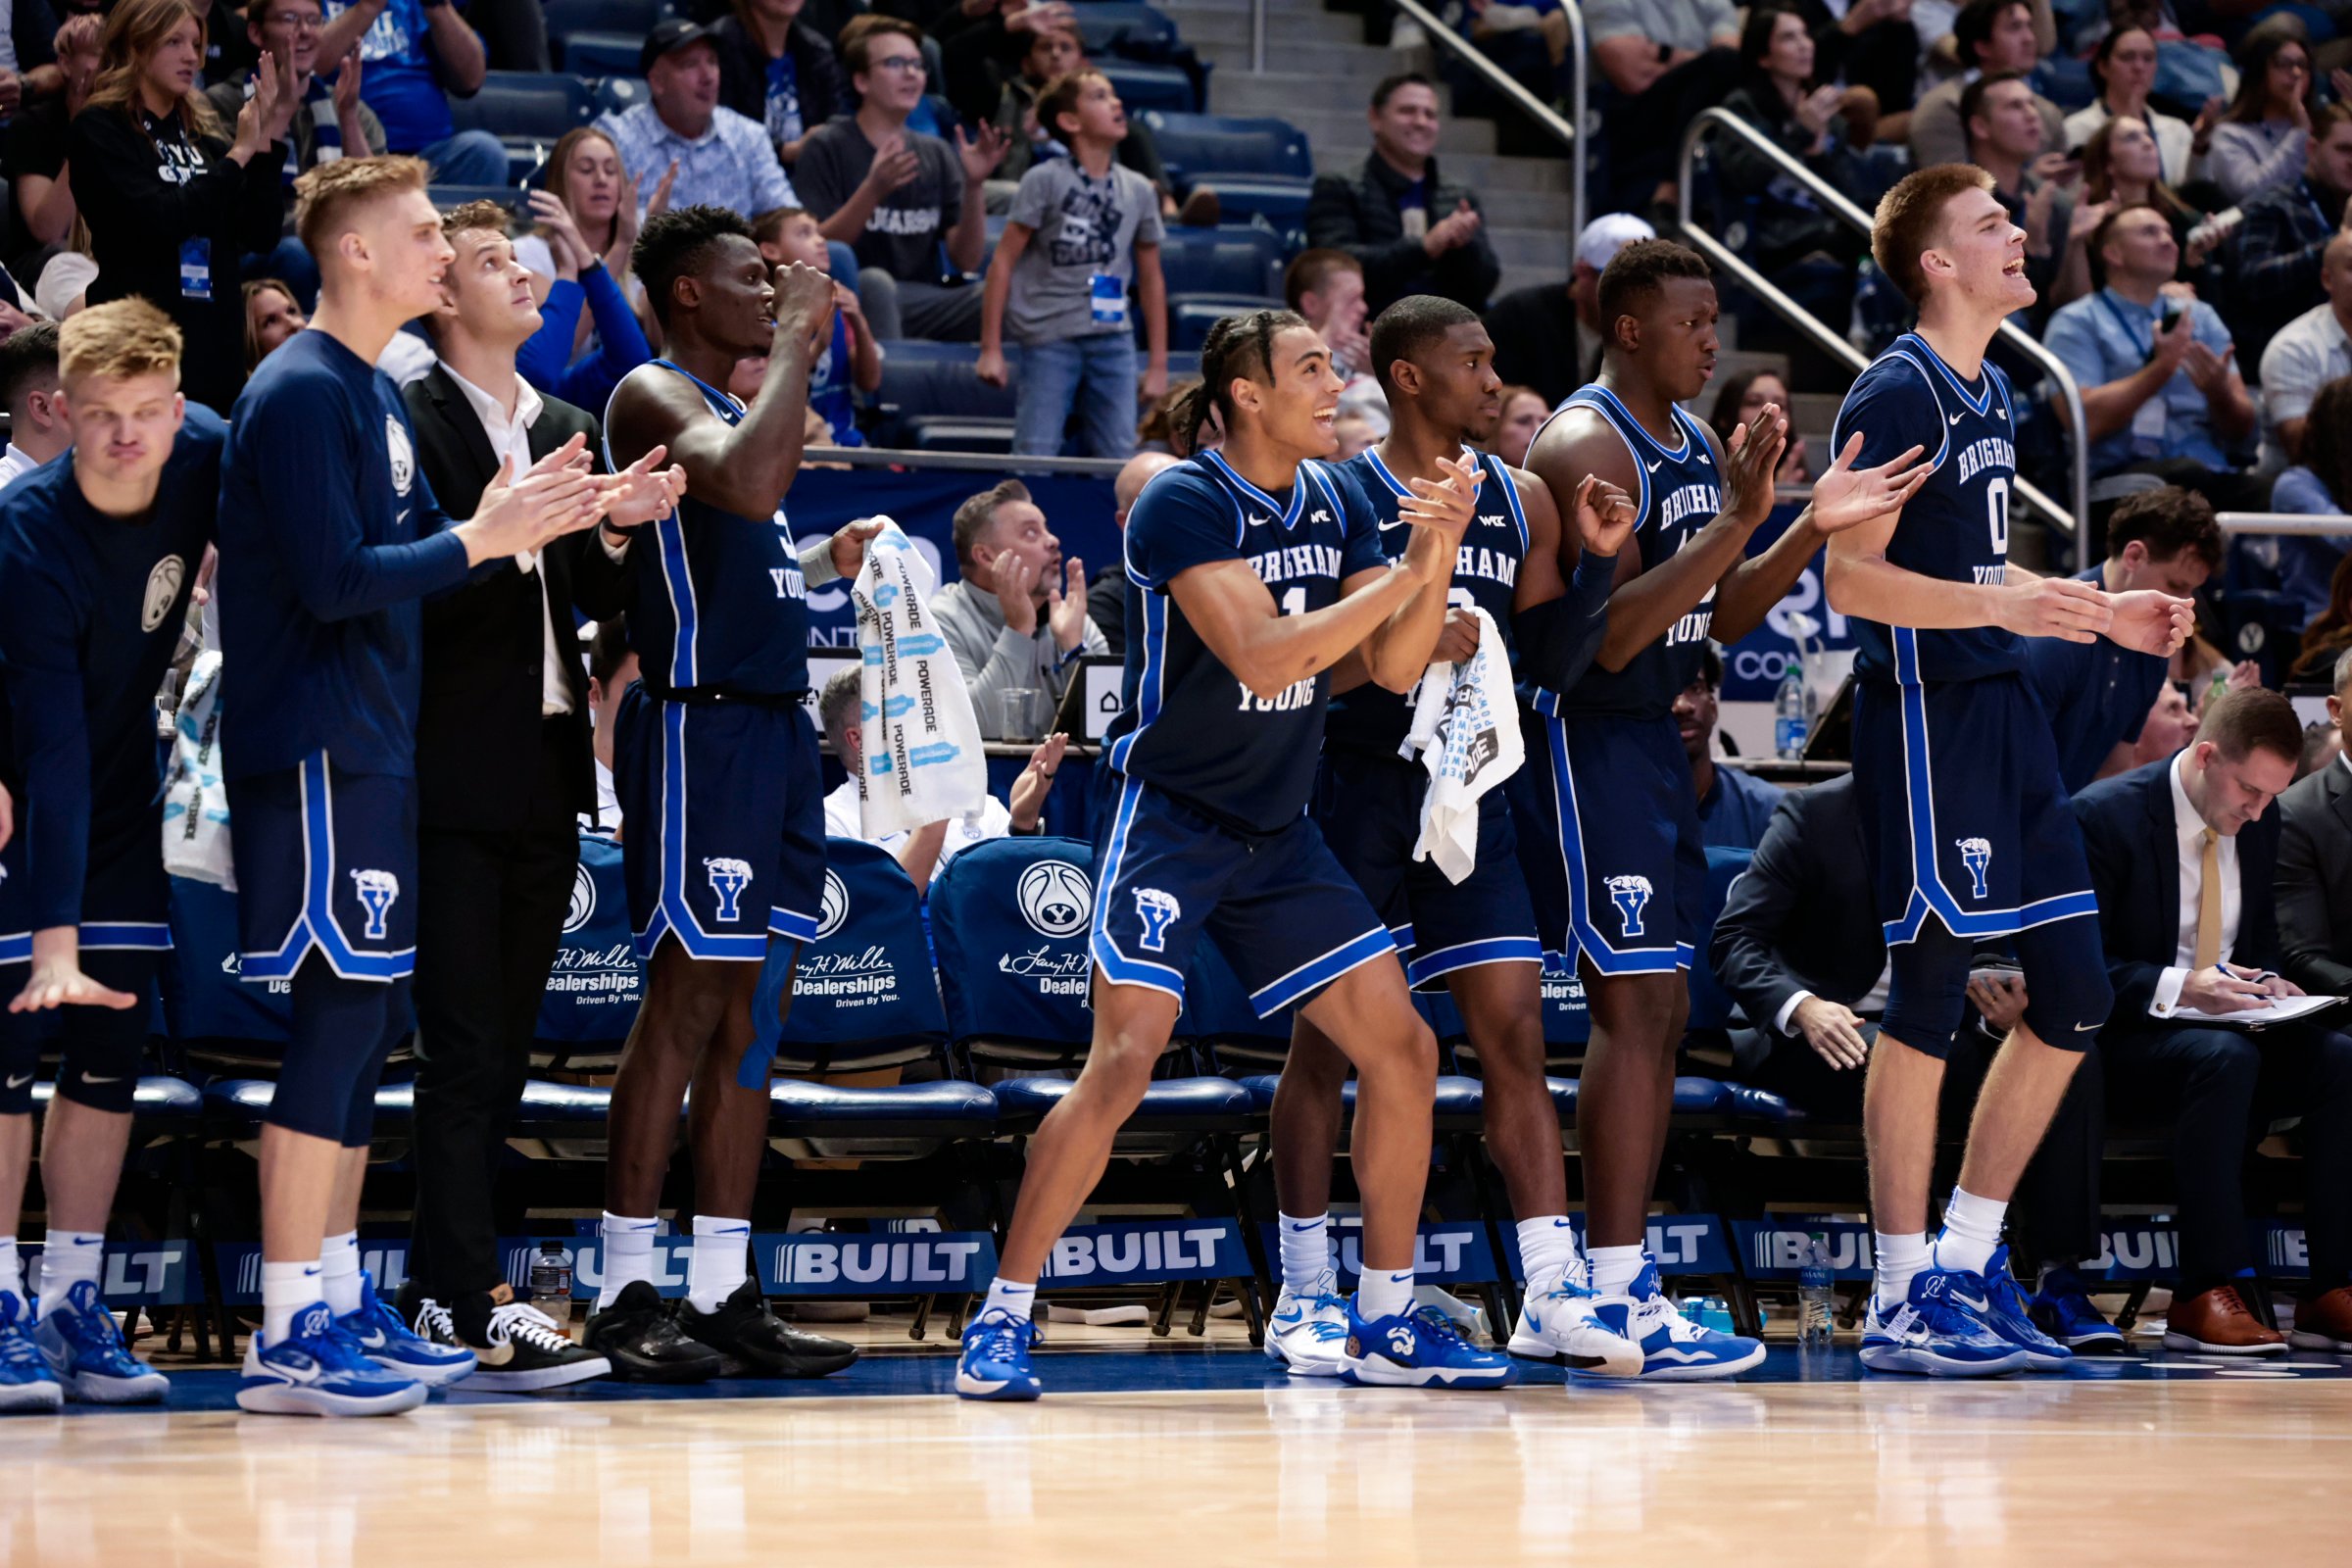 The team celebrates a score as Cougars take down Missouri State 66-64 at the Marriott Center.